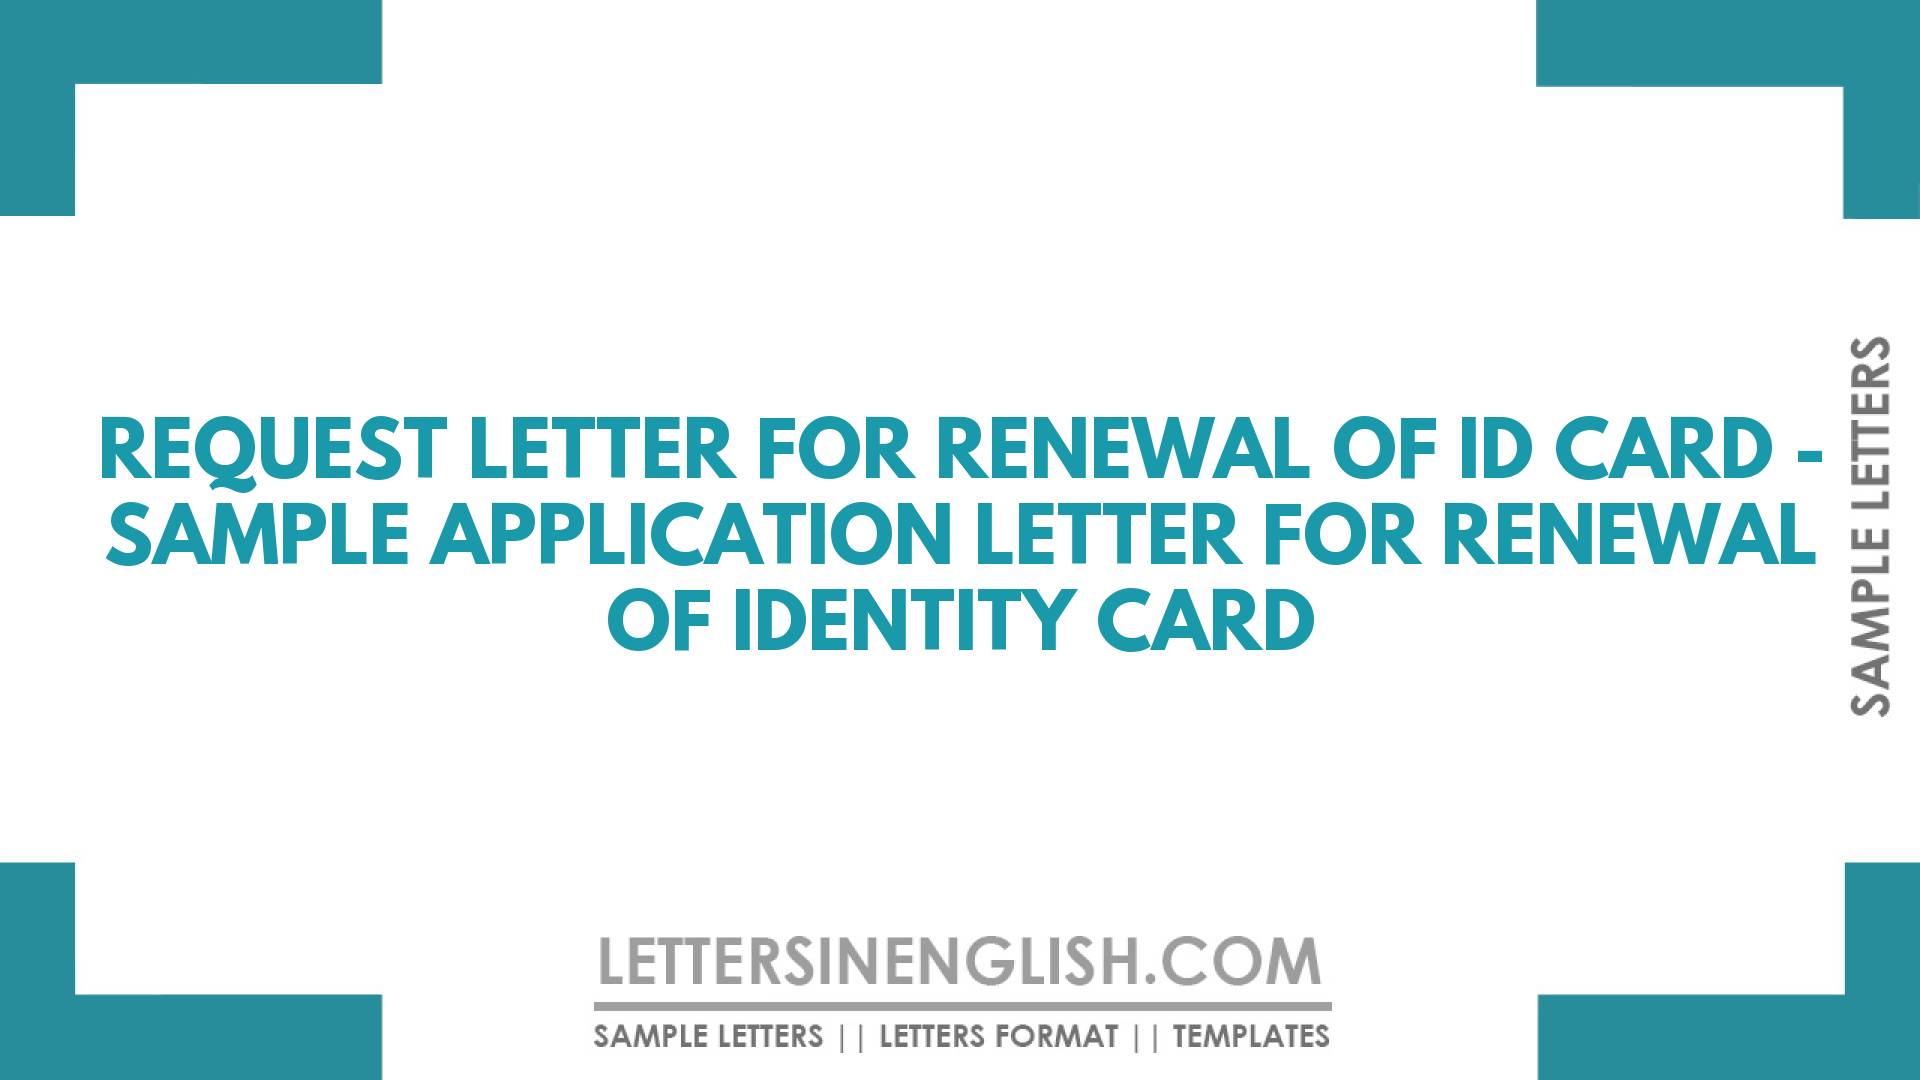 Request Letter for Renewal of ID Card – Sample Application Letter for Renewal of Identity Card